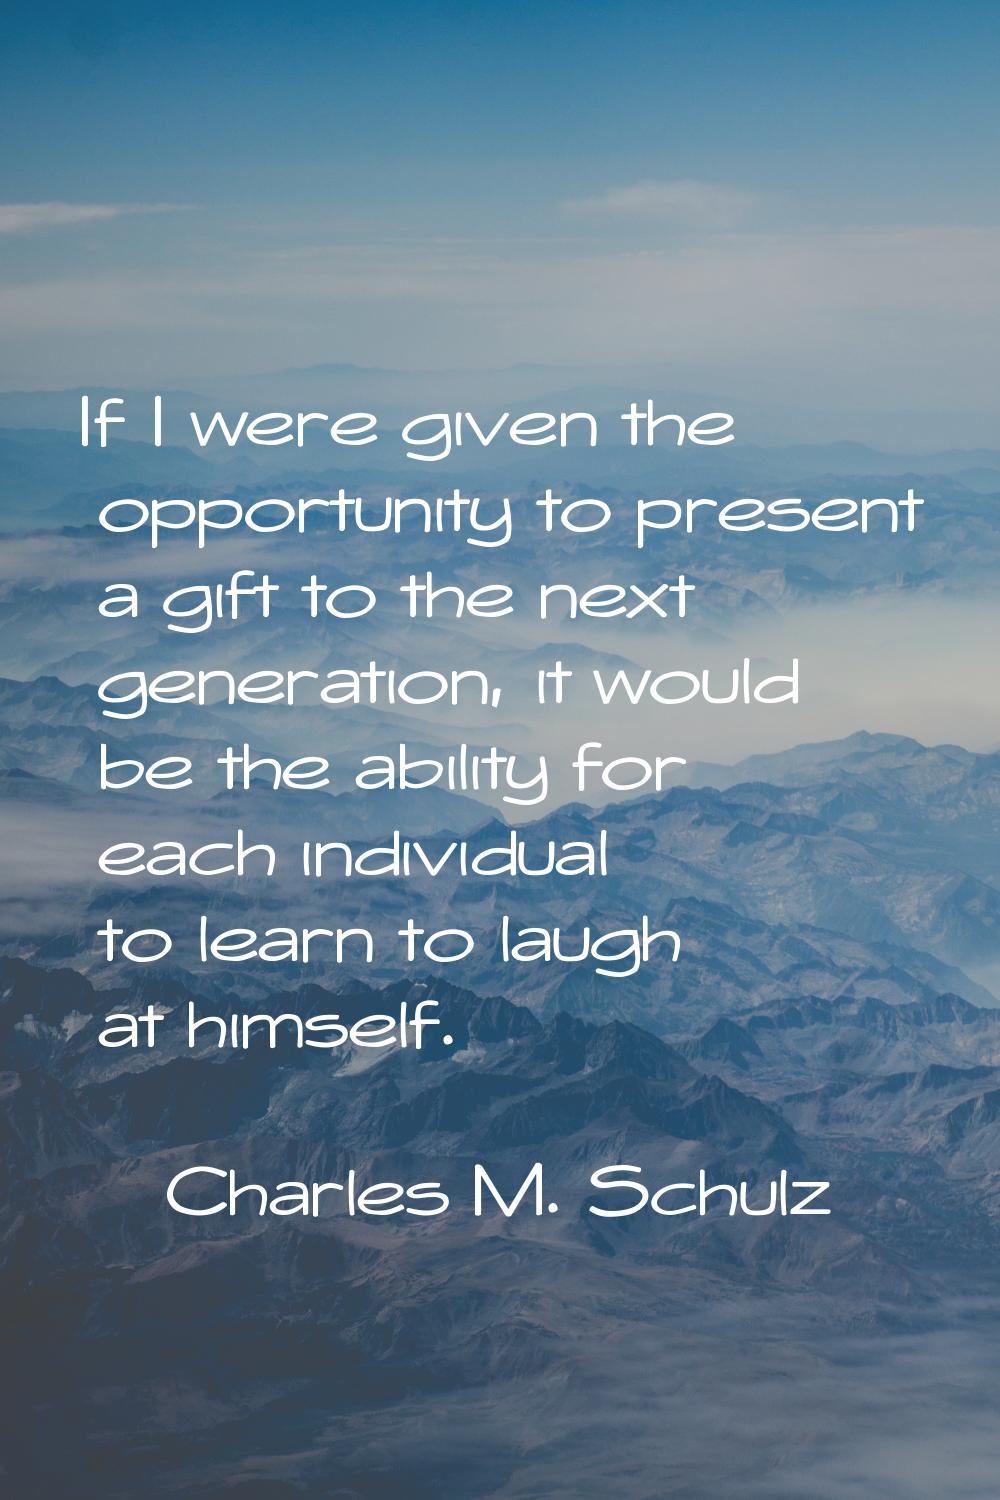 If I were given the opportunity to present a gift to the next generation, it would be the ability f